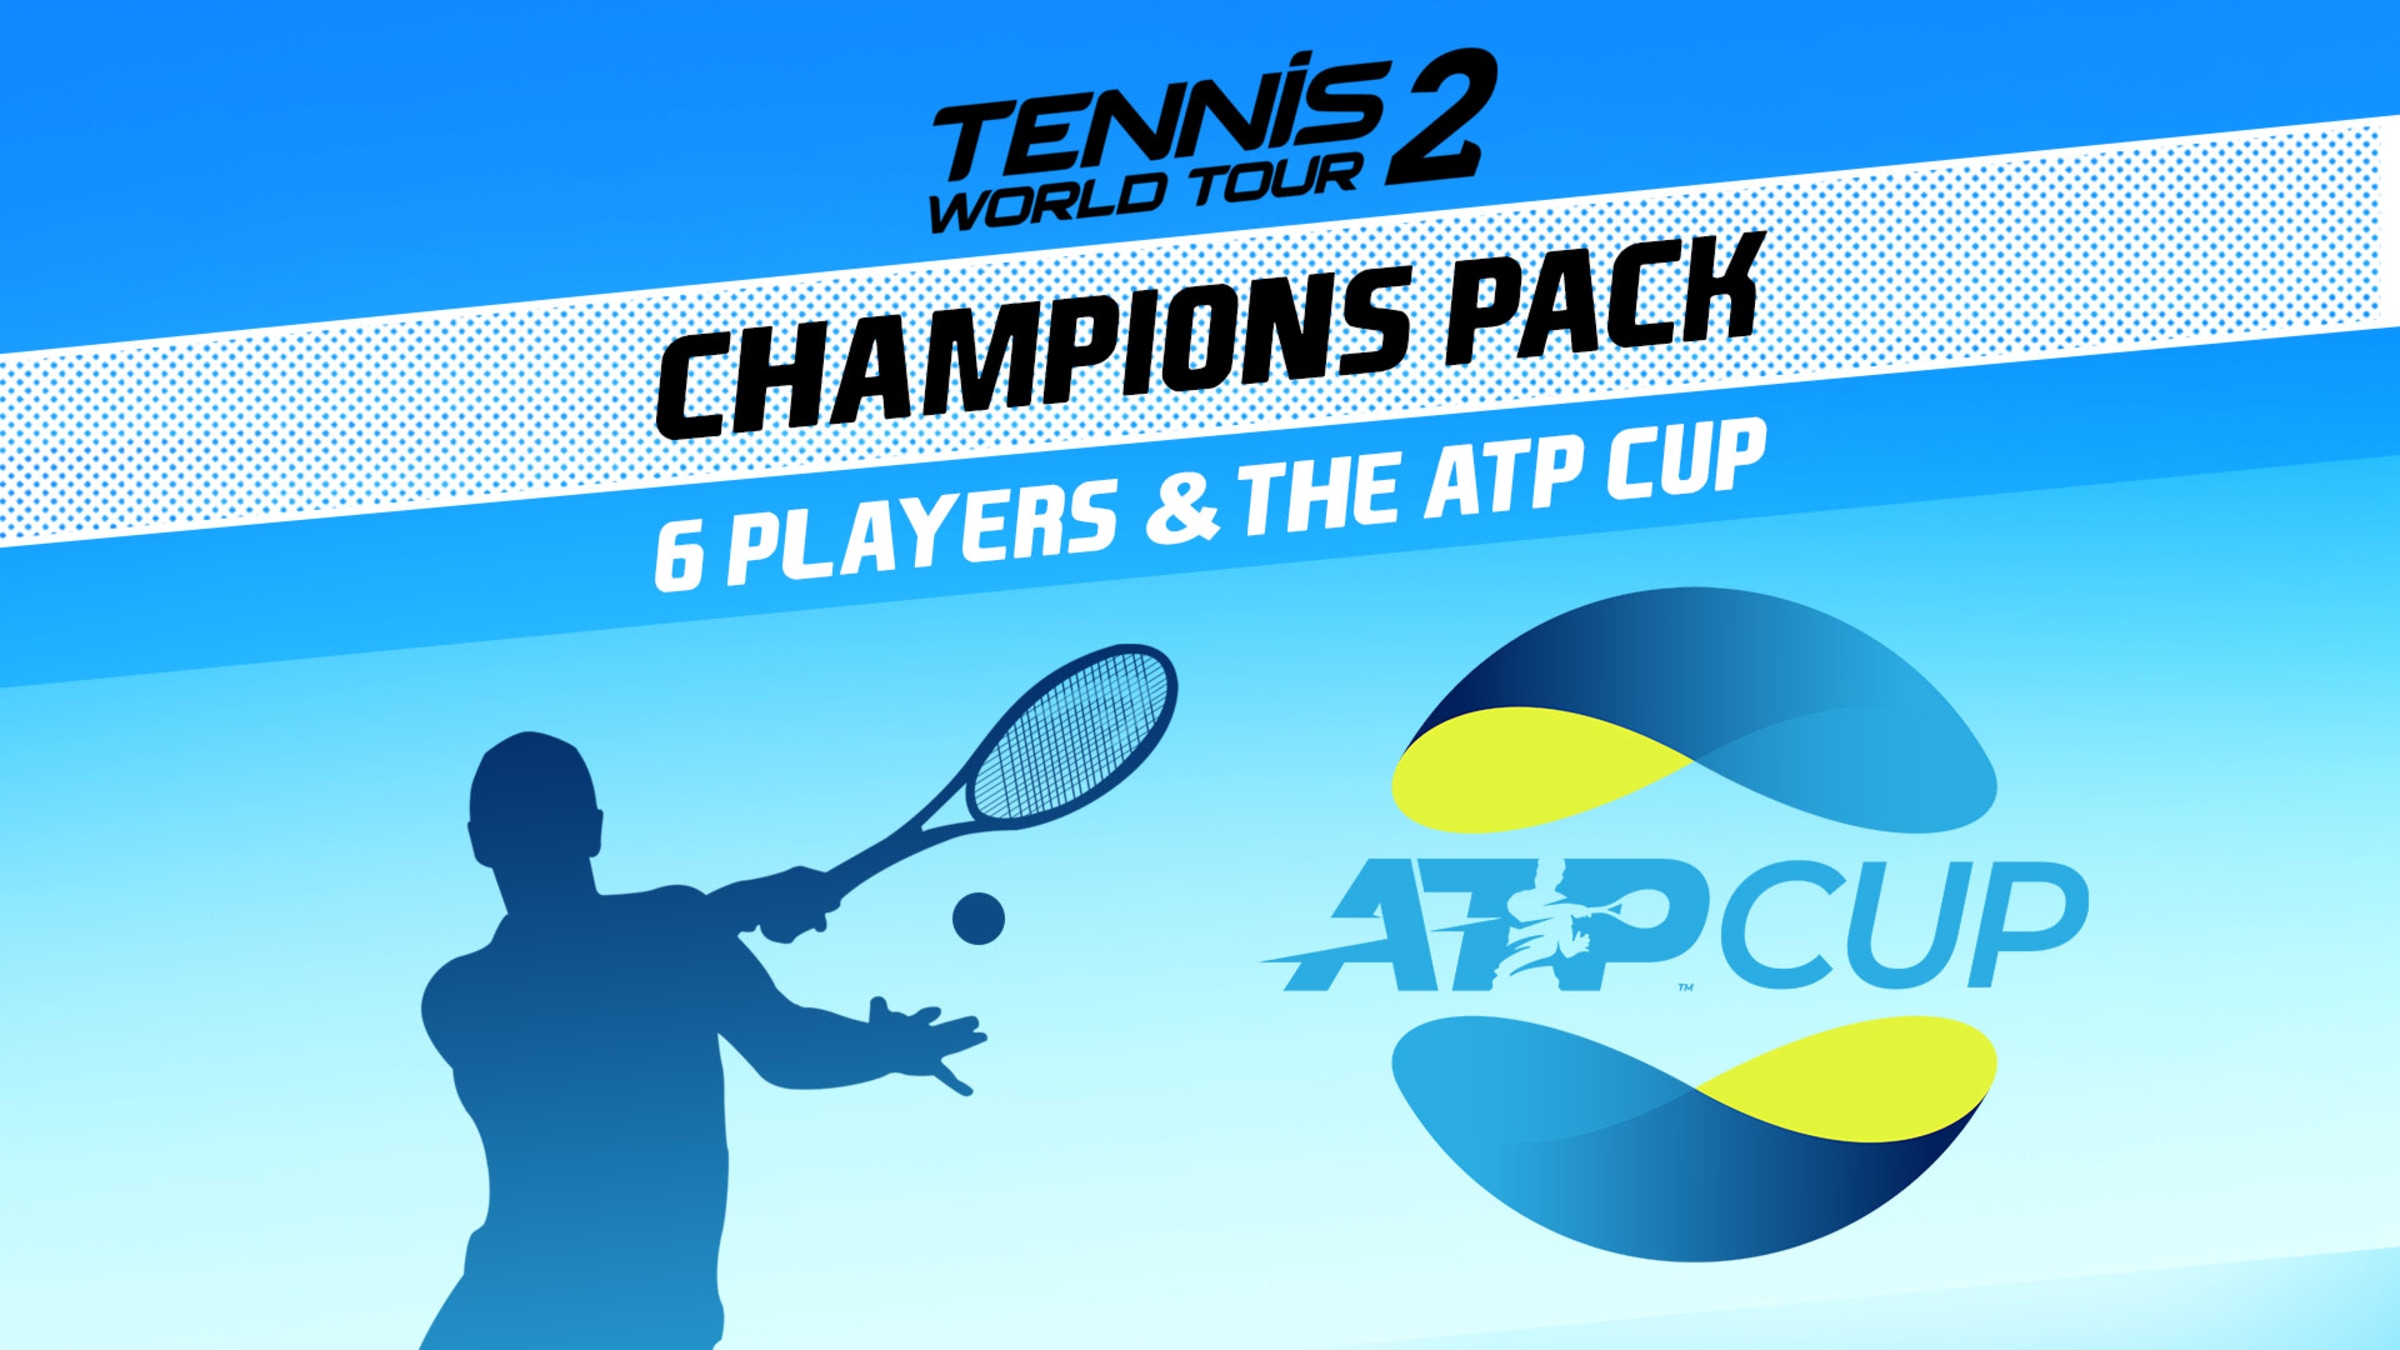 Tennis World Tour 2 - Champions Pack for Nintendo Switch